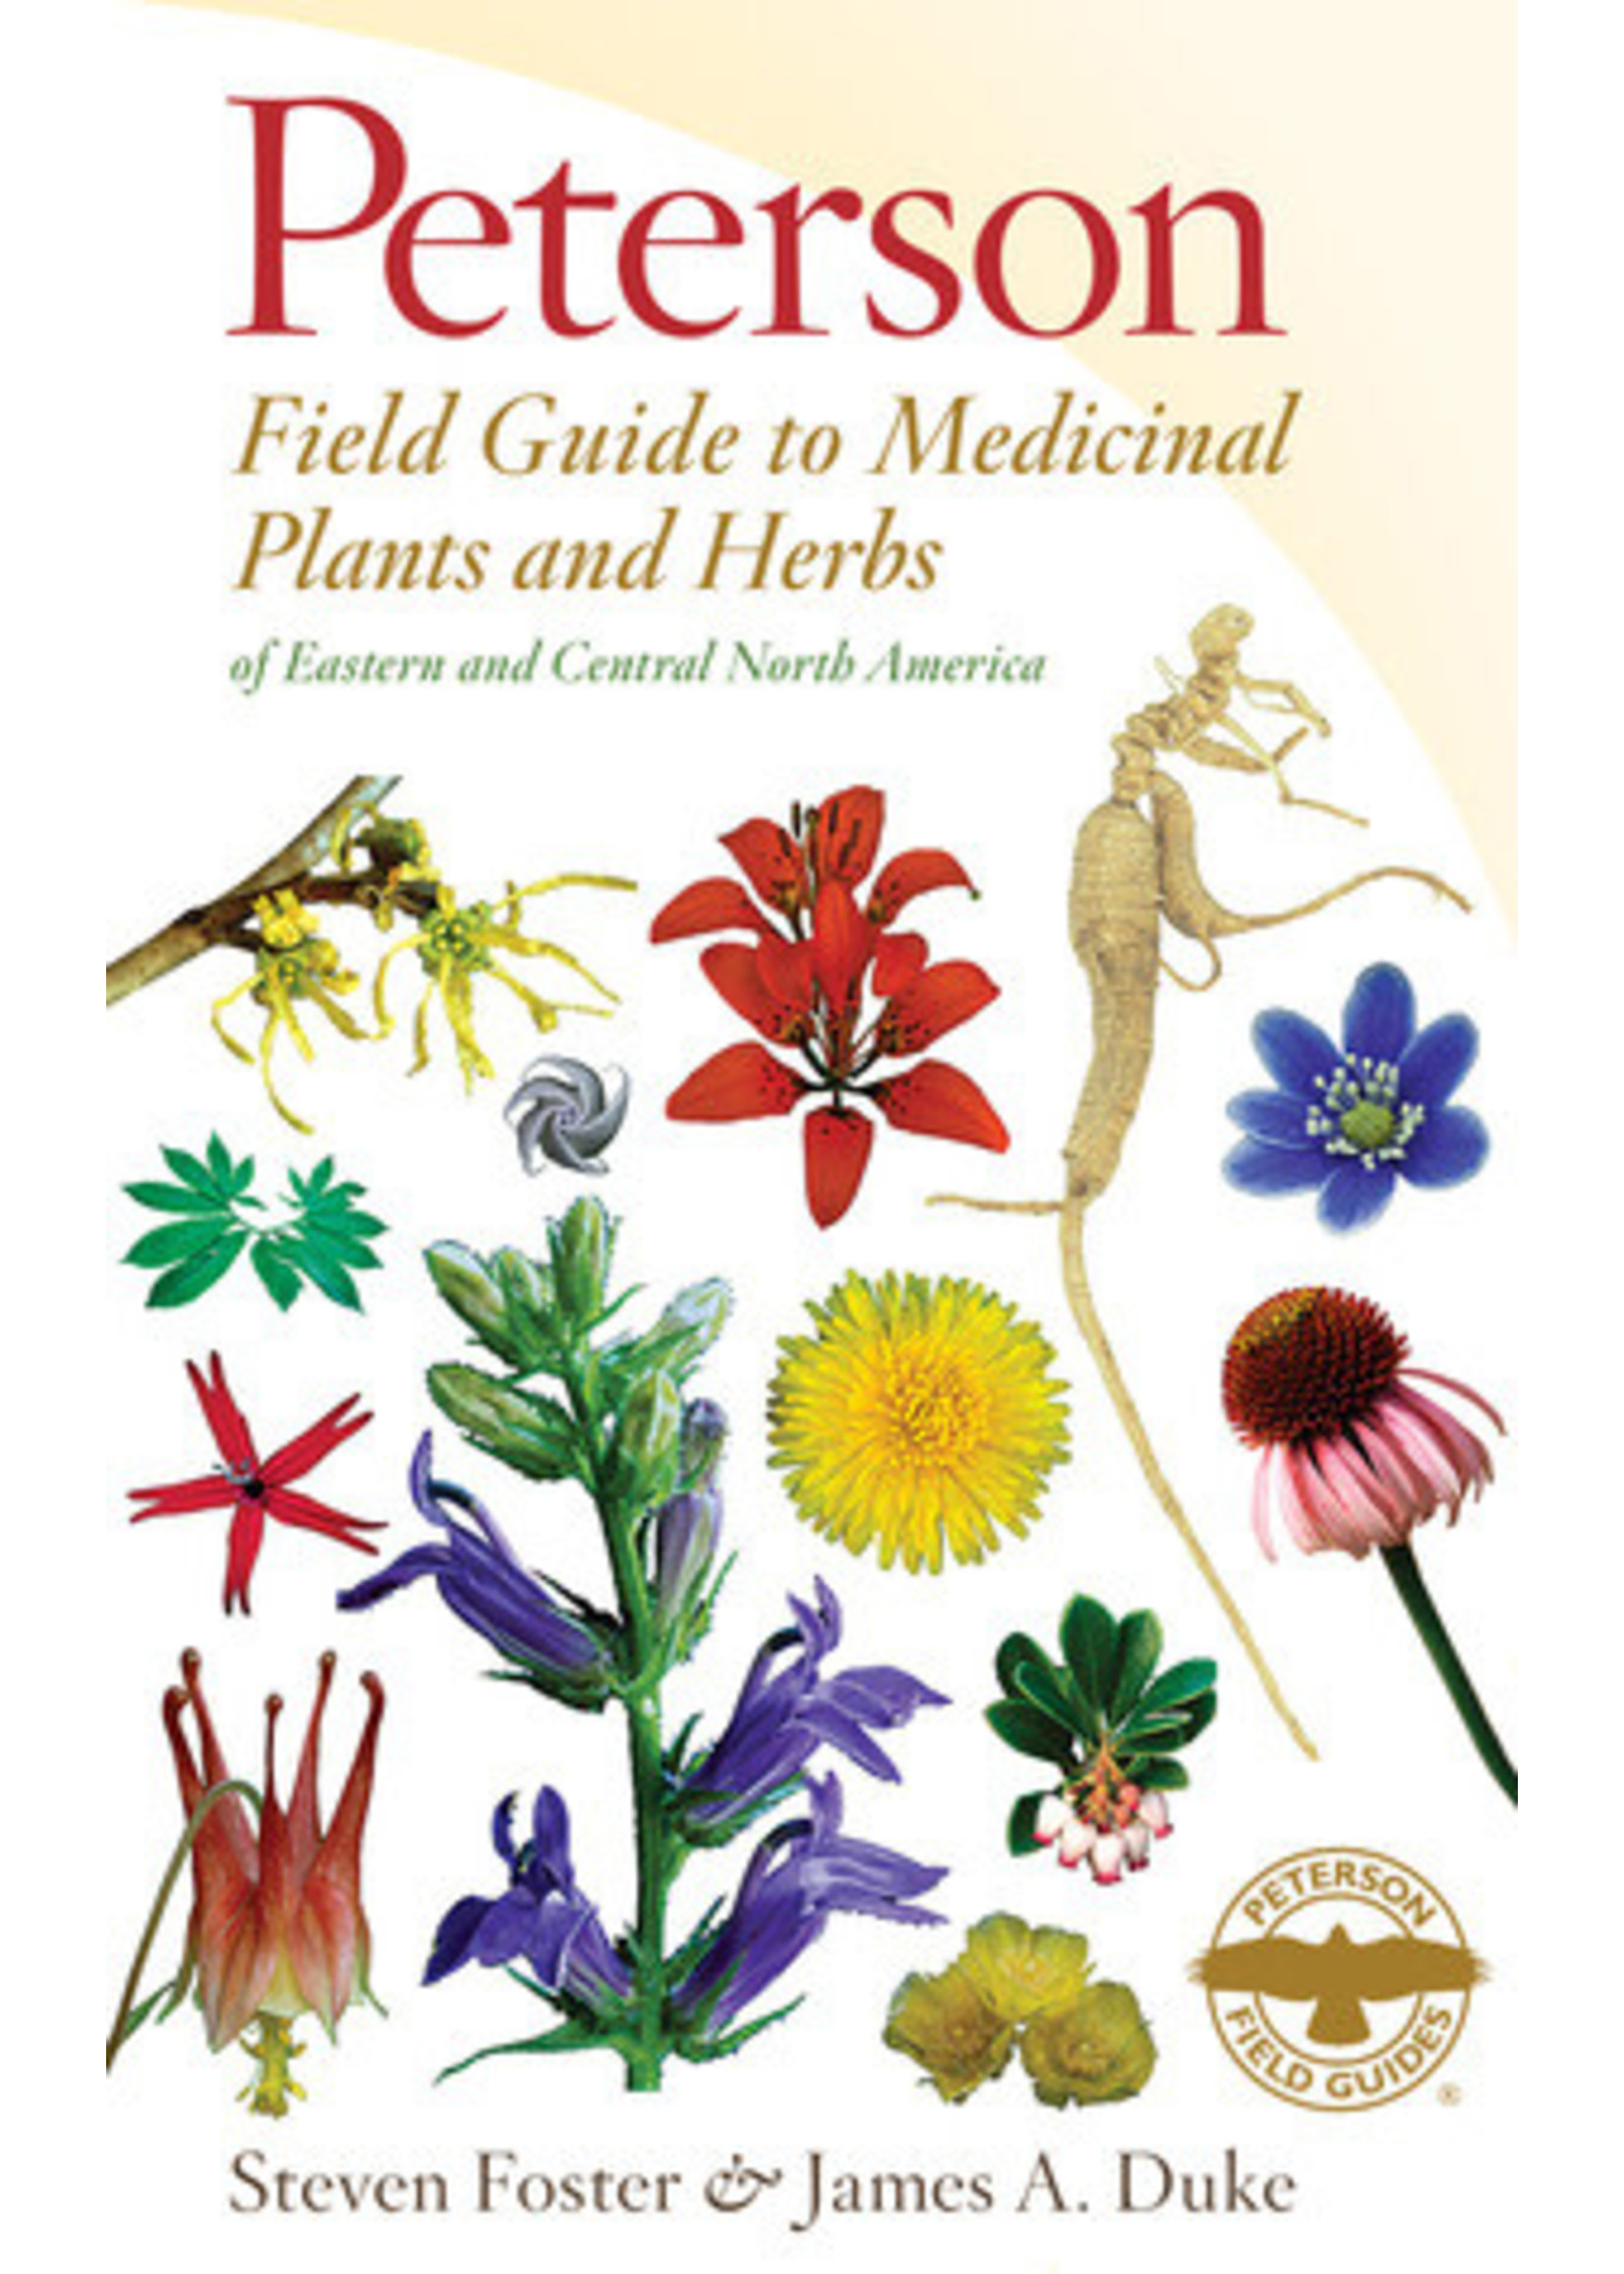 Peterson Field Guide to Medicinal Plants Herbs of Eastern & Central North America by Steven Foster,  James A. Duke